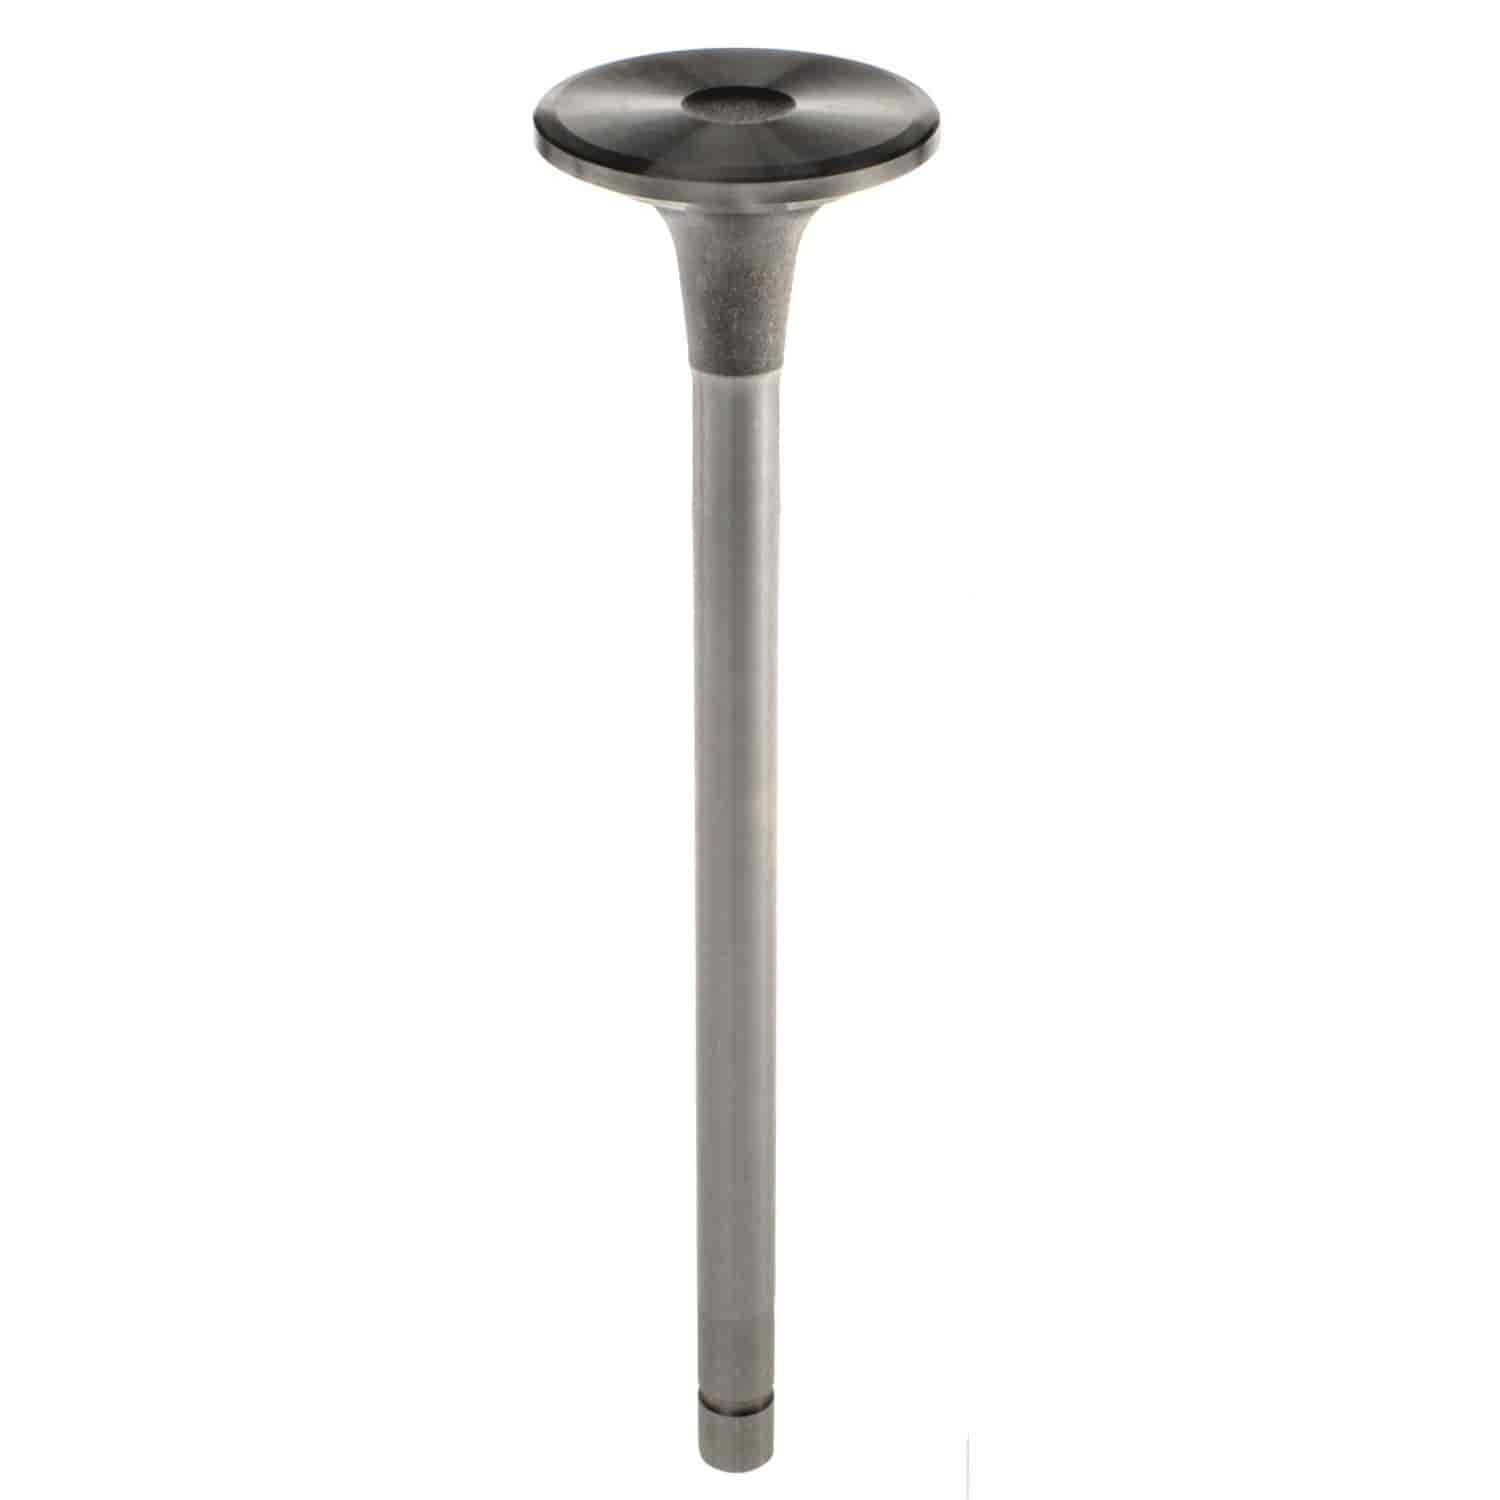 Intake Valve for Cummins L10 Up to and